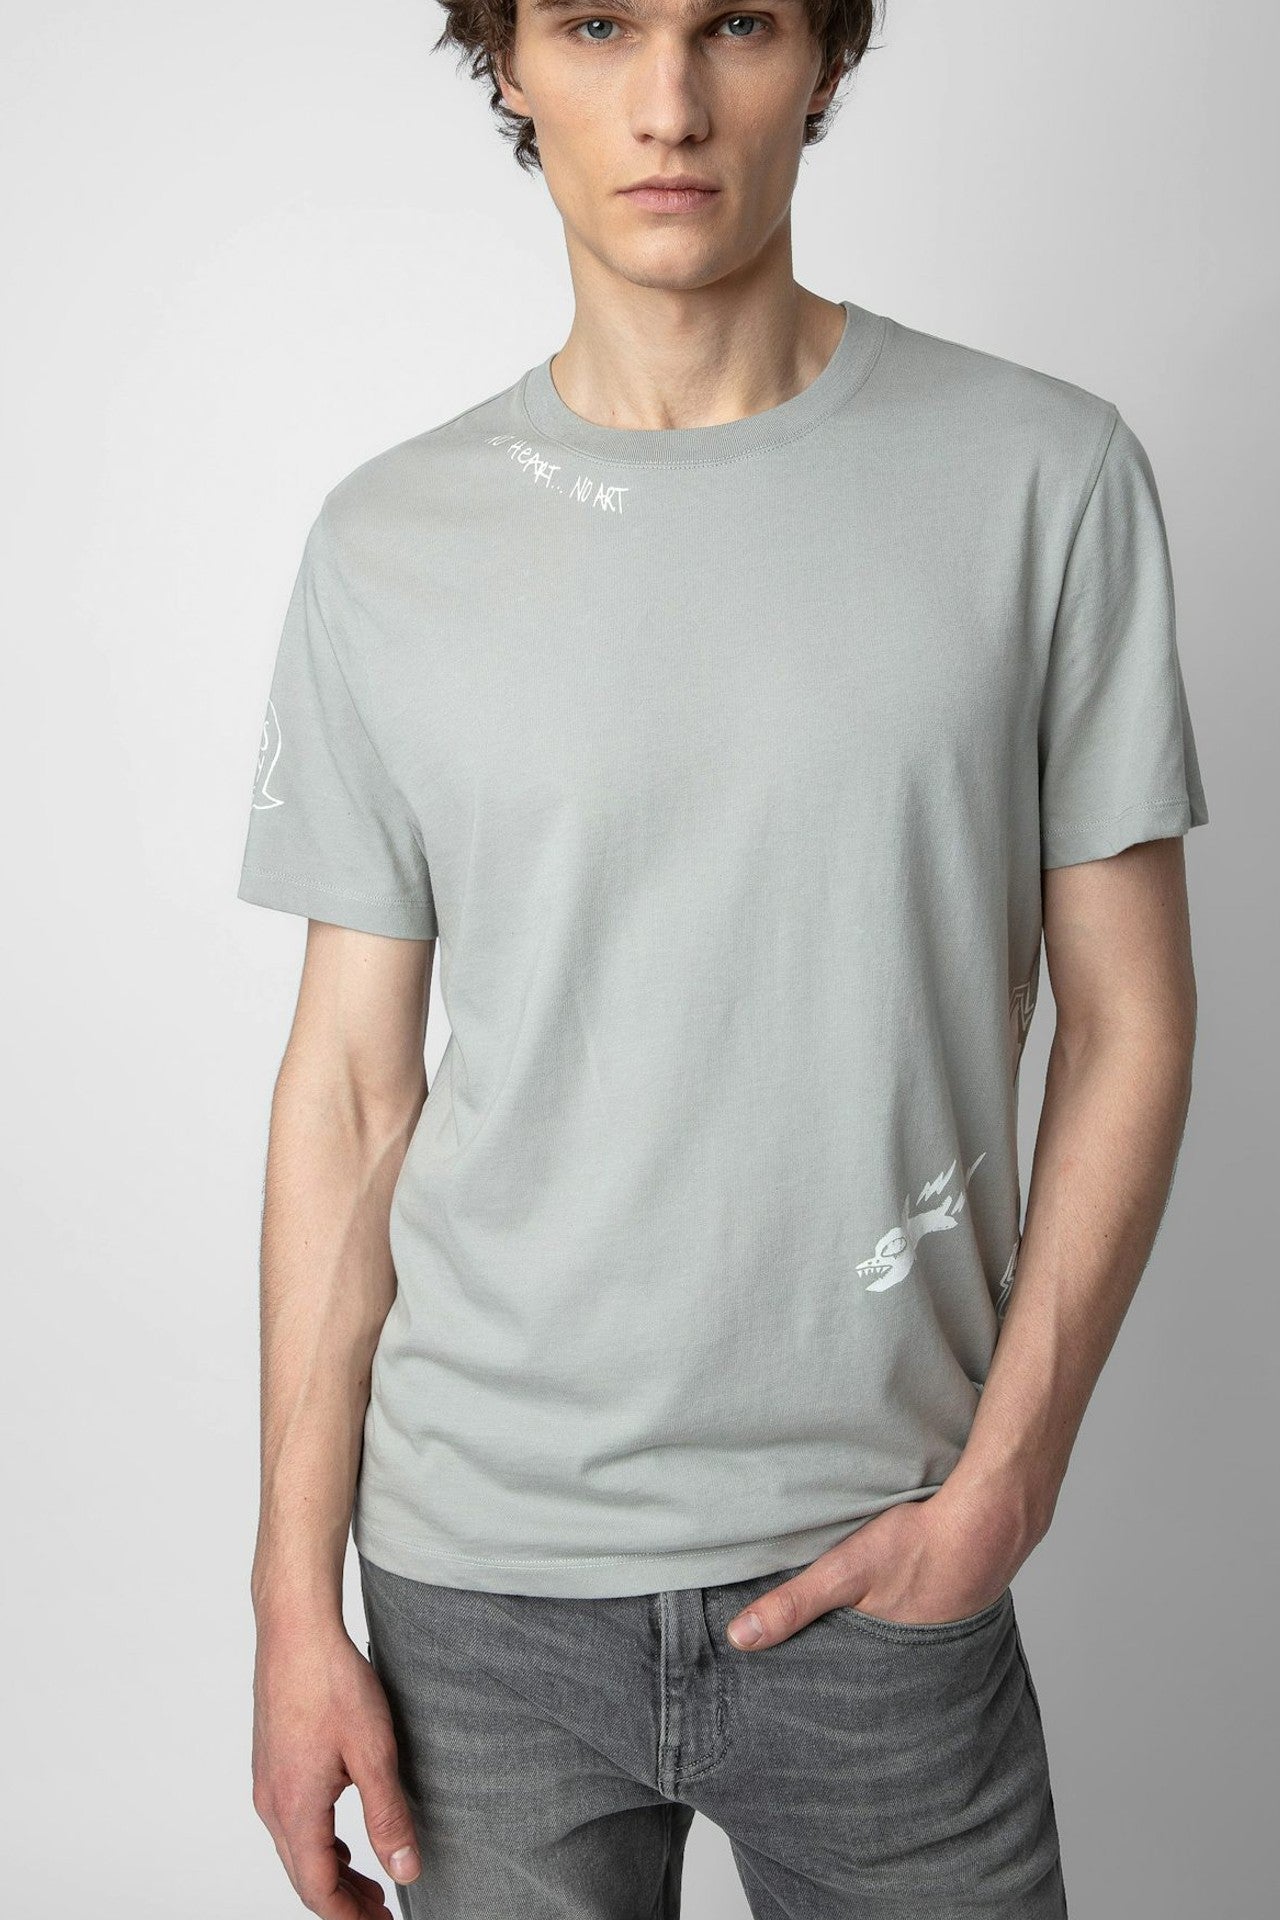 Ted Tag T-Shirt